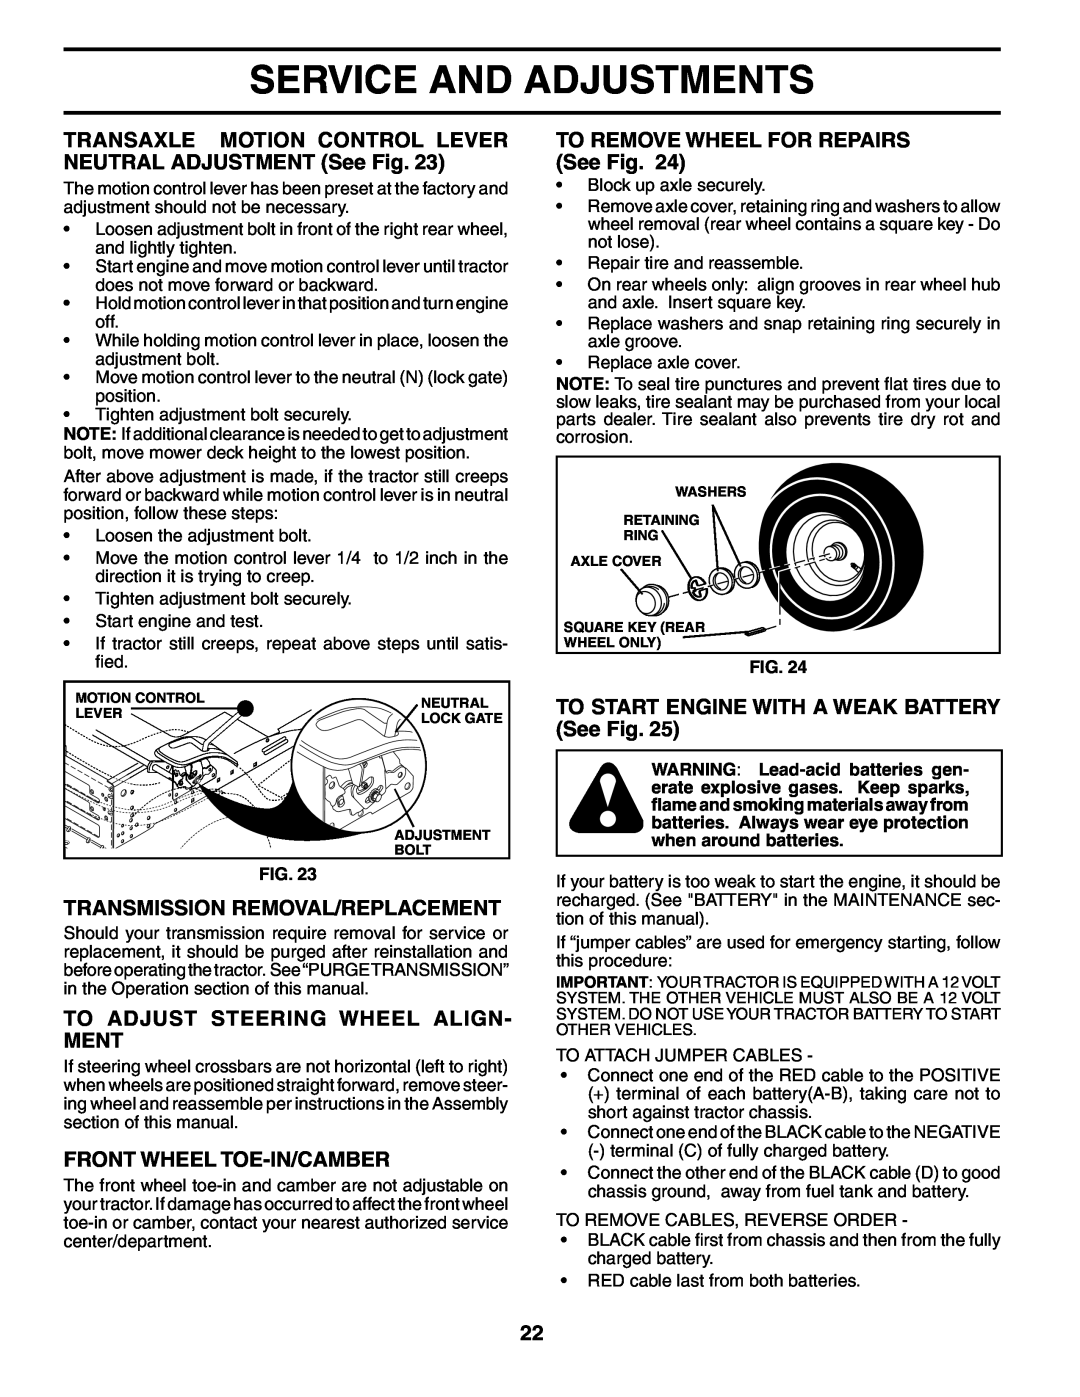 Poulan 196085 manual TRANSAXLE MOTION CONTROL LEVER NEUTRAL ADJUSTMENT See Fig, Transmission Removal/Replacement 